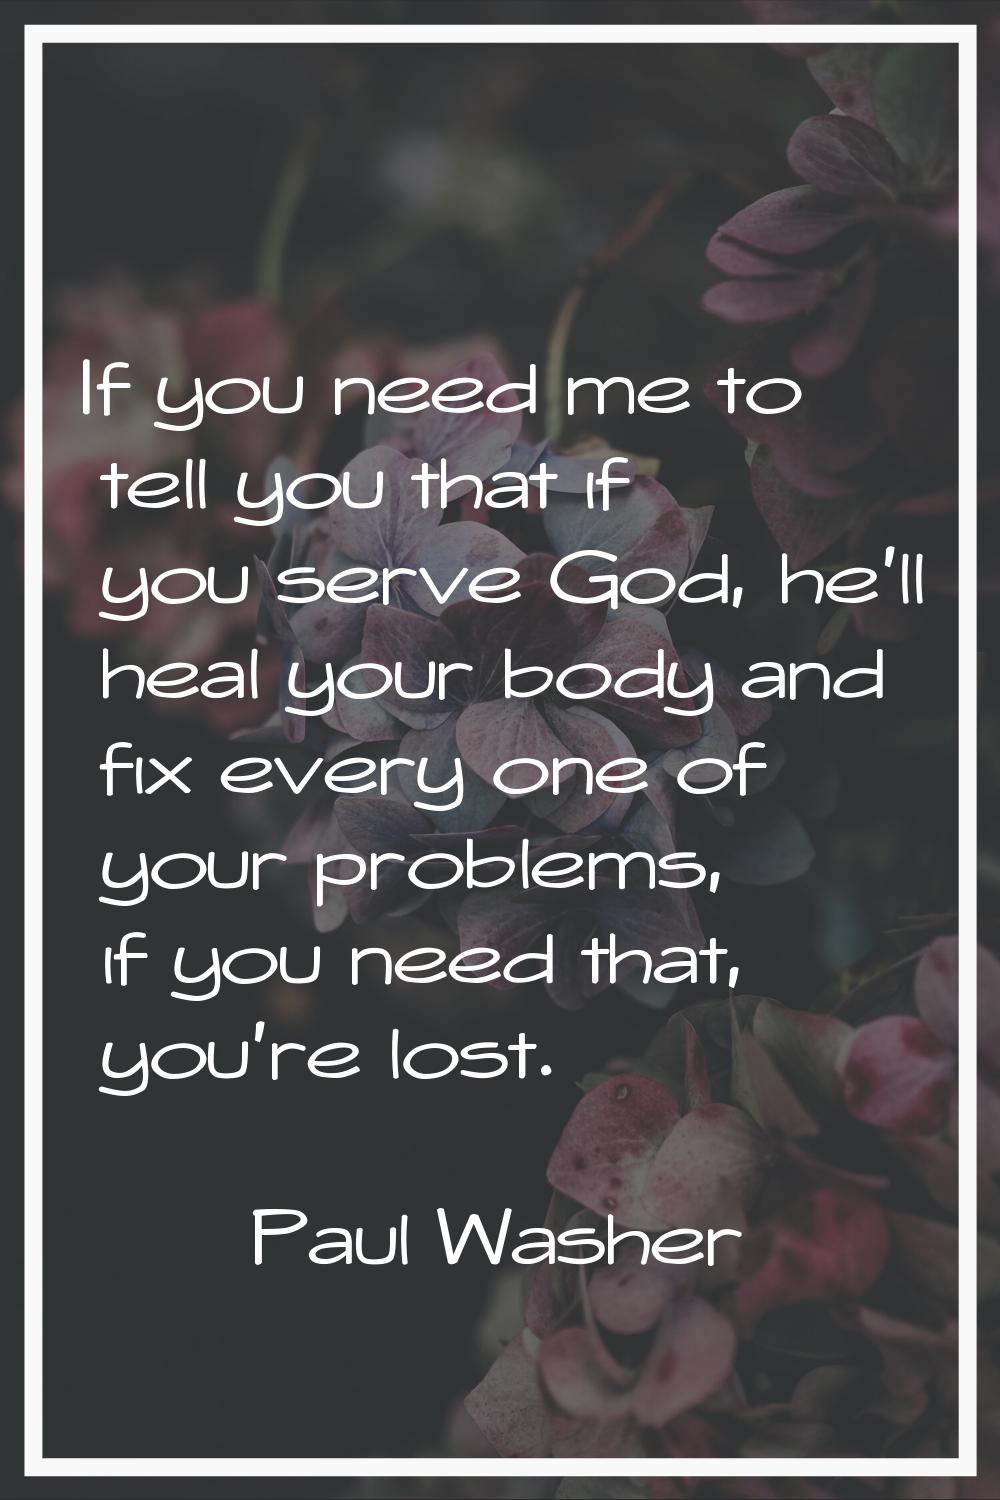 If you need me to tell you that if you serve God, he'll heal your body and fix every one of your pr